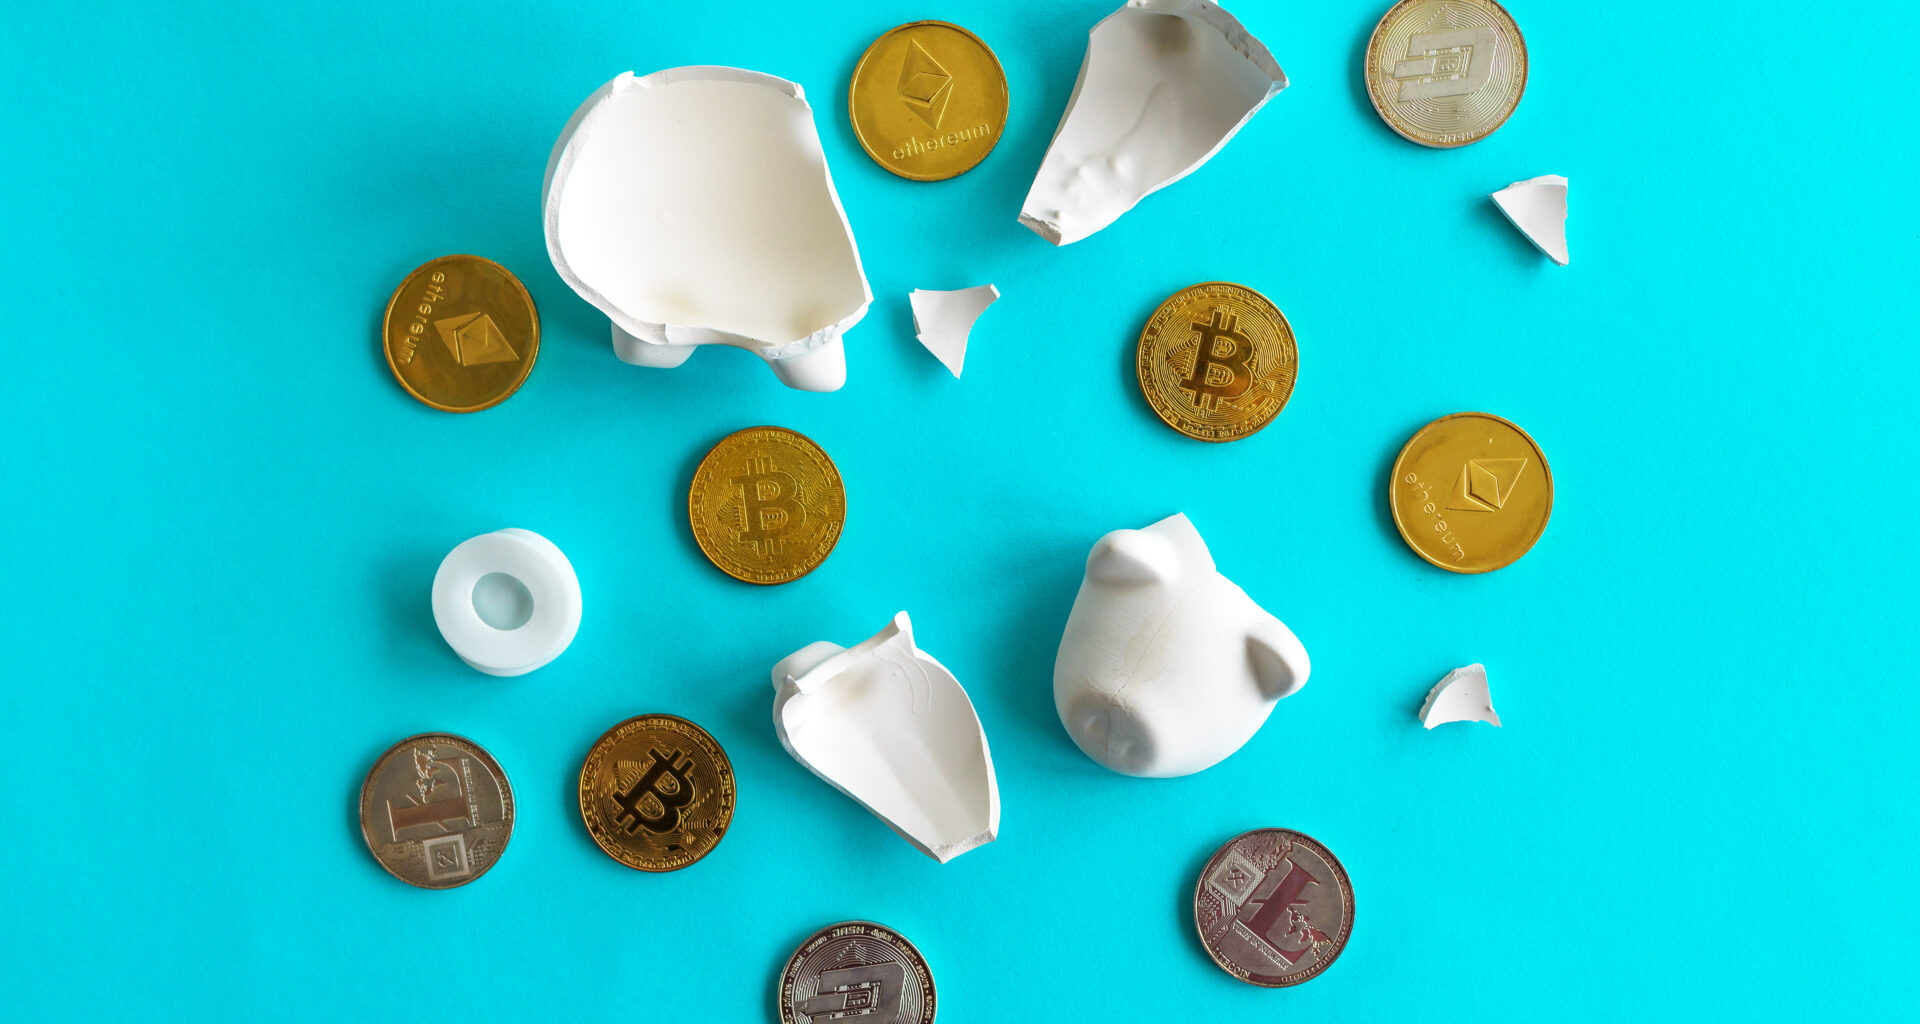 A broken piggy bank with cryptocurrency tokens on a blue surface.